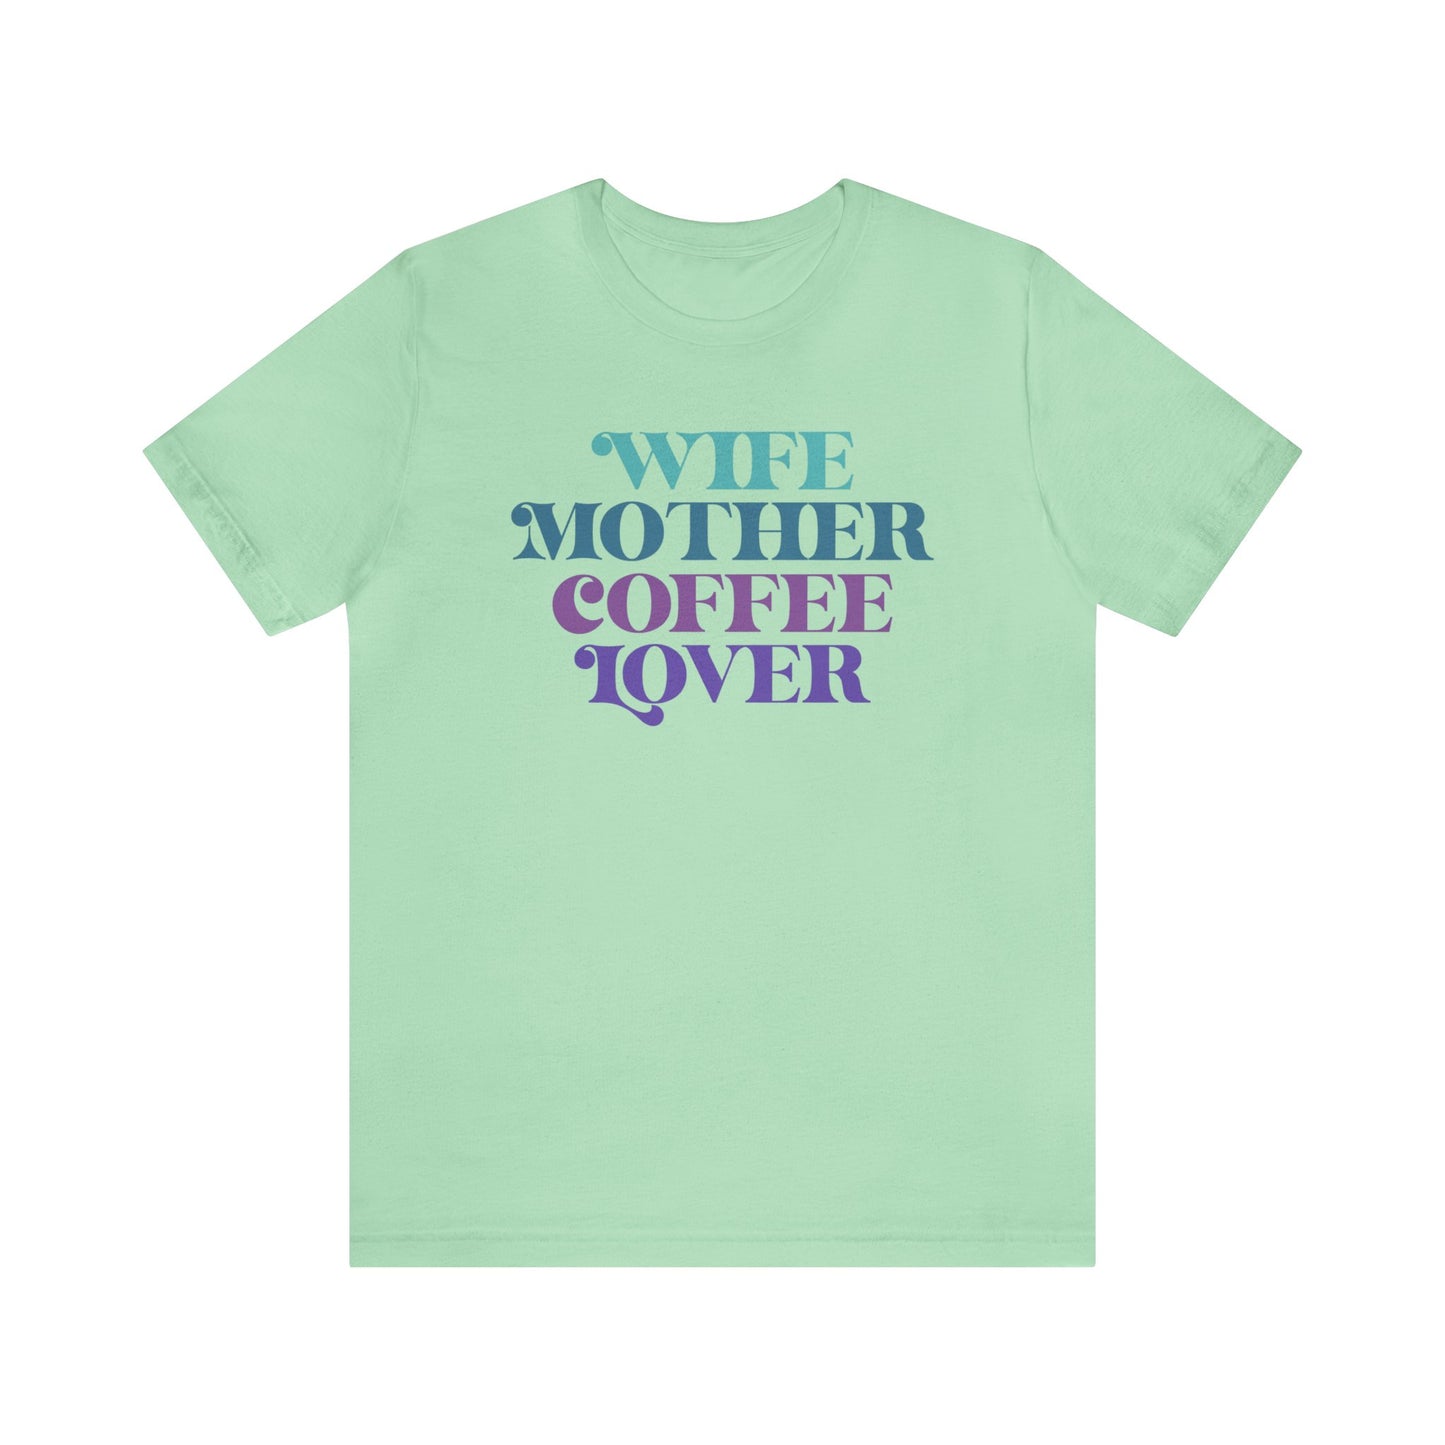 Mom T-Shirt For Wife TShirt For Coffee Lover T Shirt For Mothers Day Tee